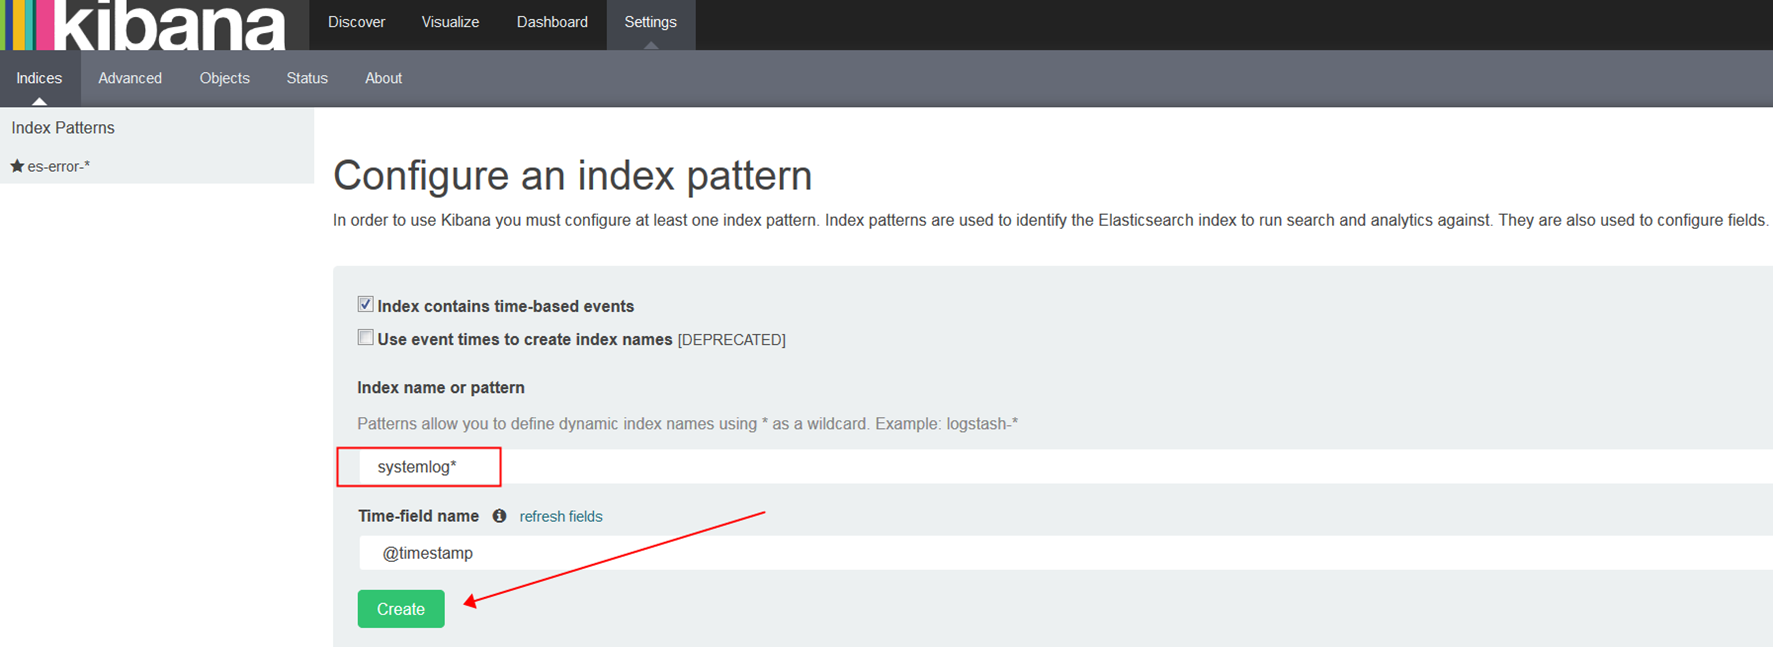 Use event. Elk Elasticsearch. Create Index Elastic. Wildcard-запись. Timely selected.